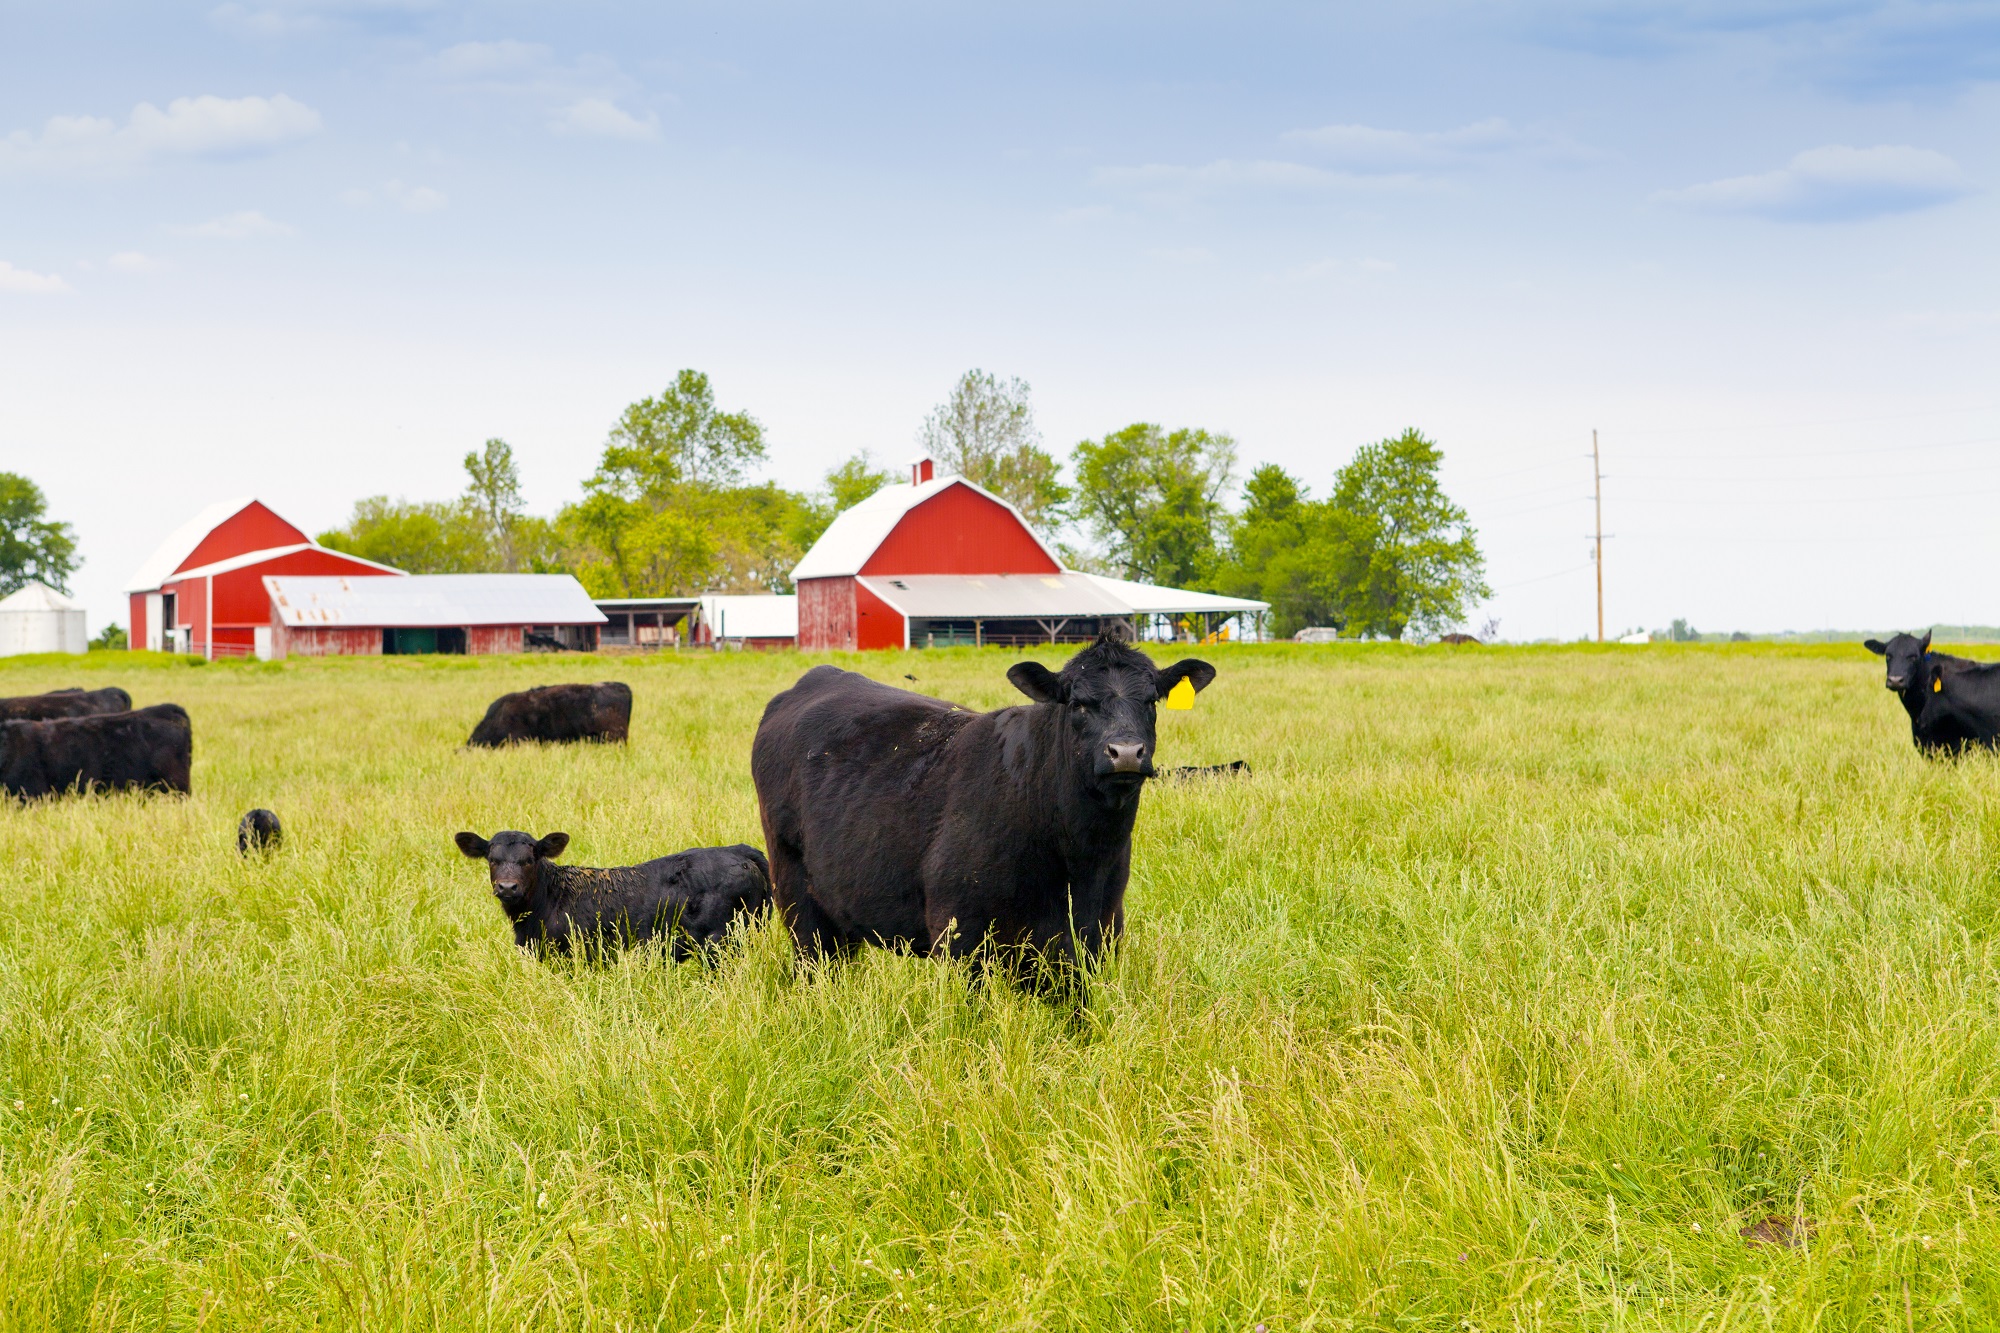 Discover Agriculture in Benton County: Minnesota Ranks 5th in the U.S. for Ag Production Photo